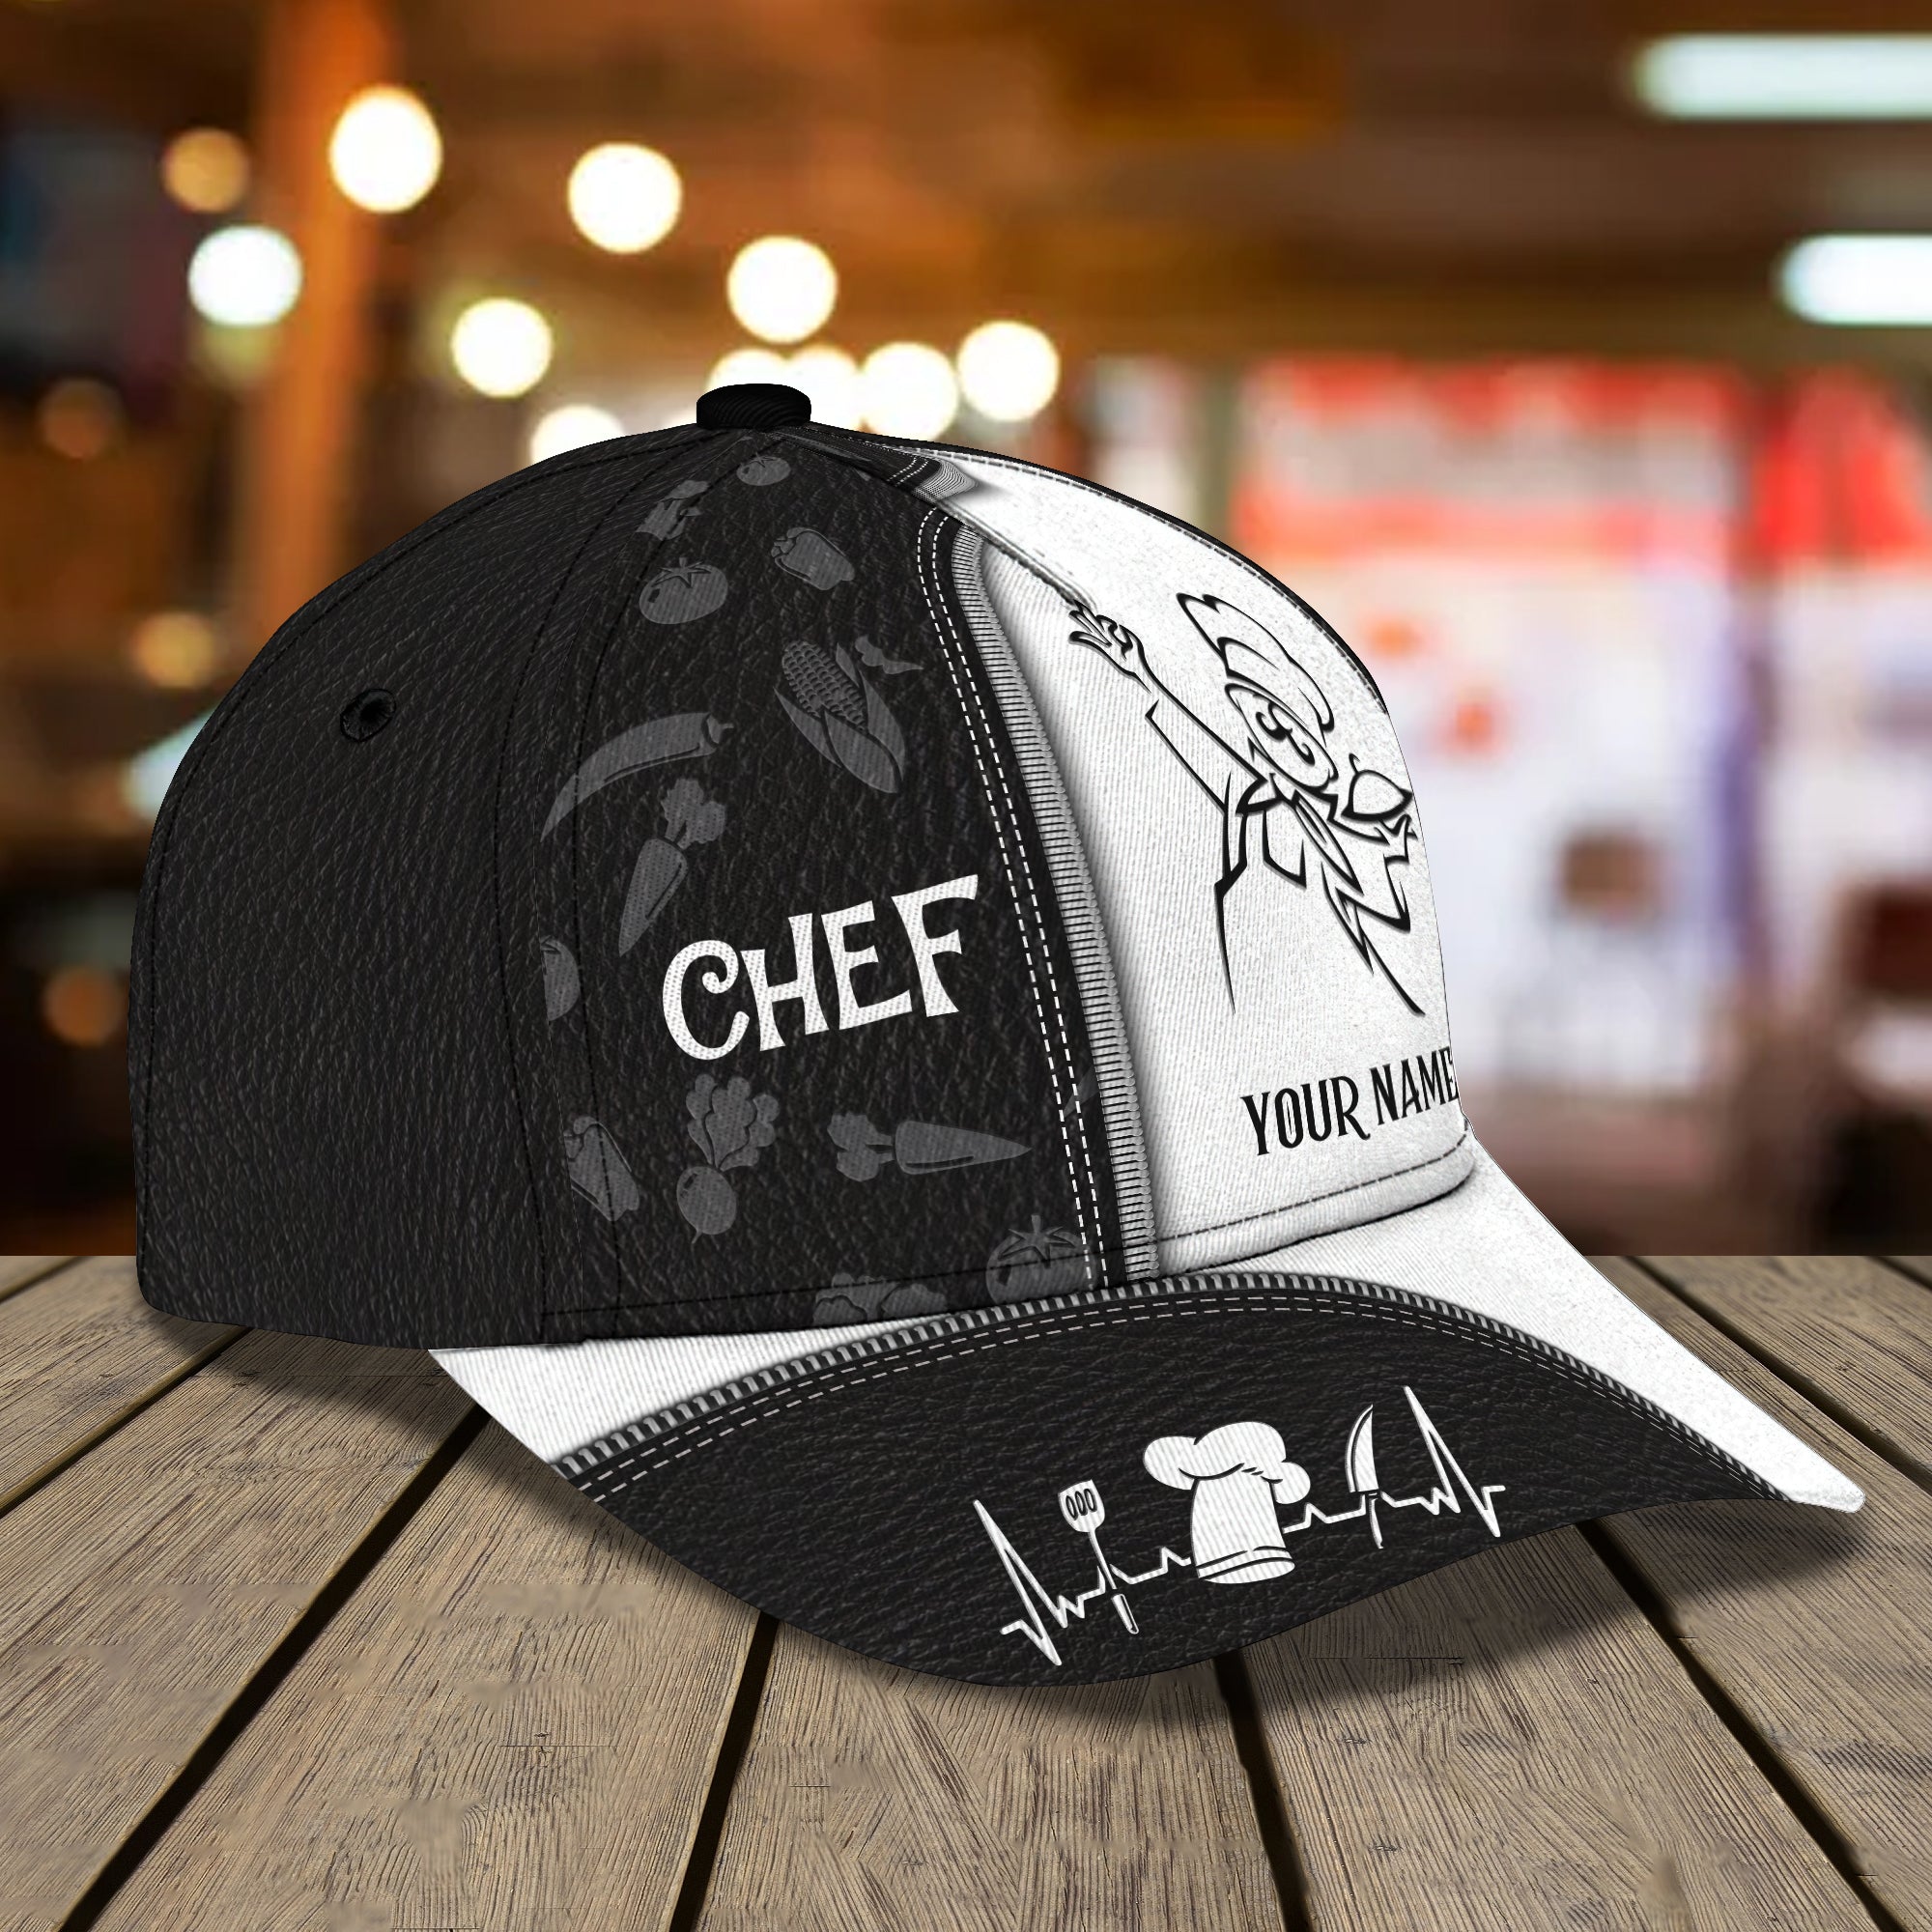 Chef 1 - Personalized Name Cap - HY97